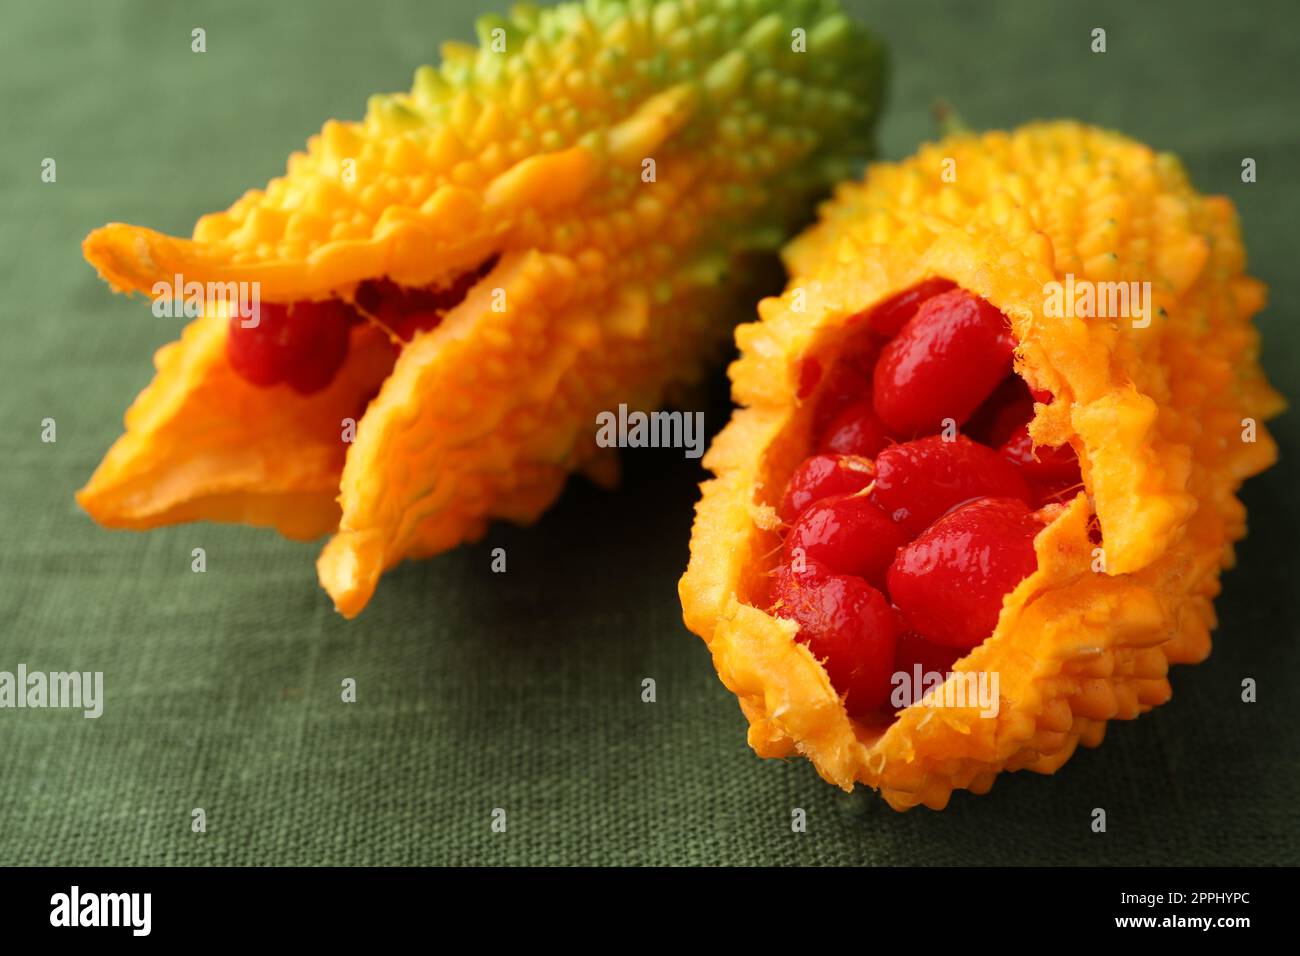 Fresh bitter melons with red seeds on dark green cloth, closeup Stock Photo